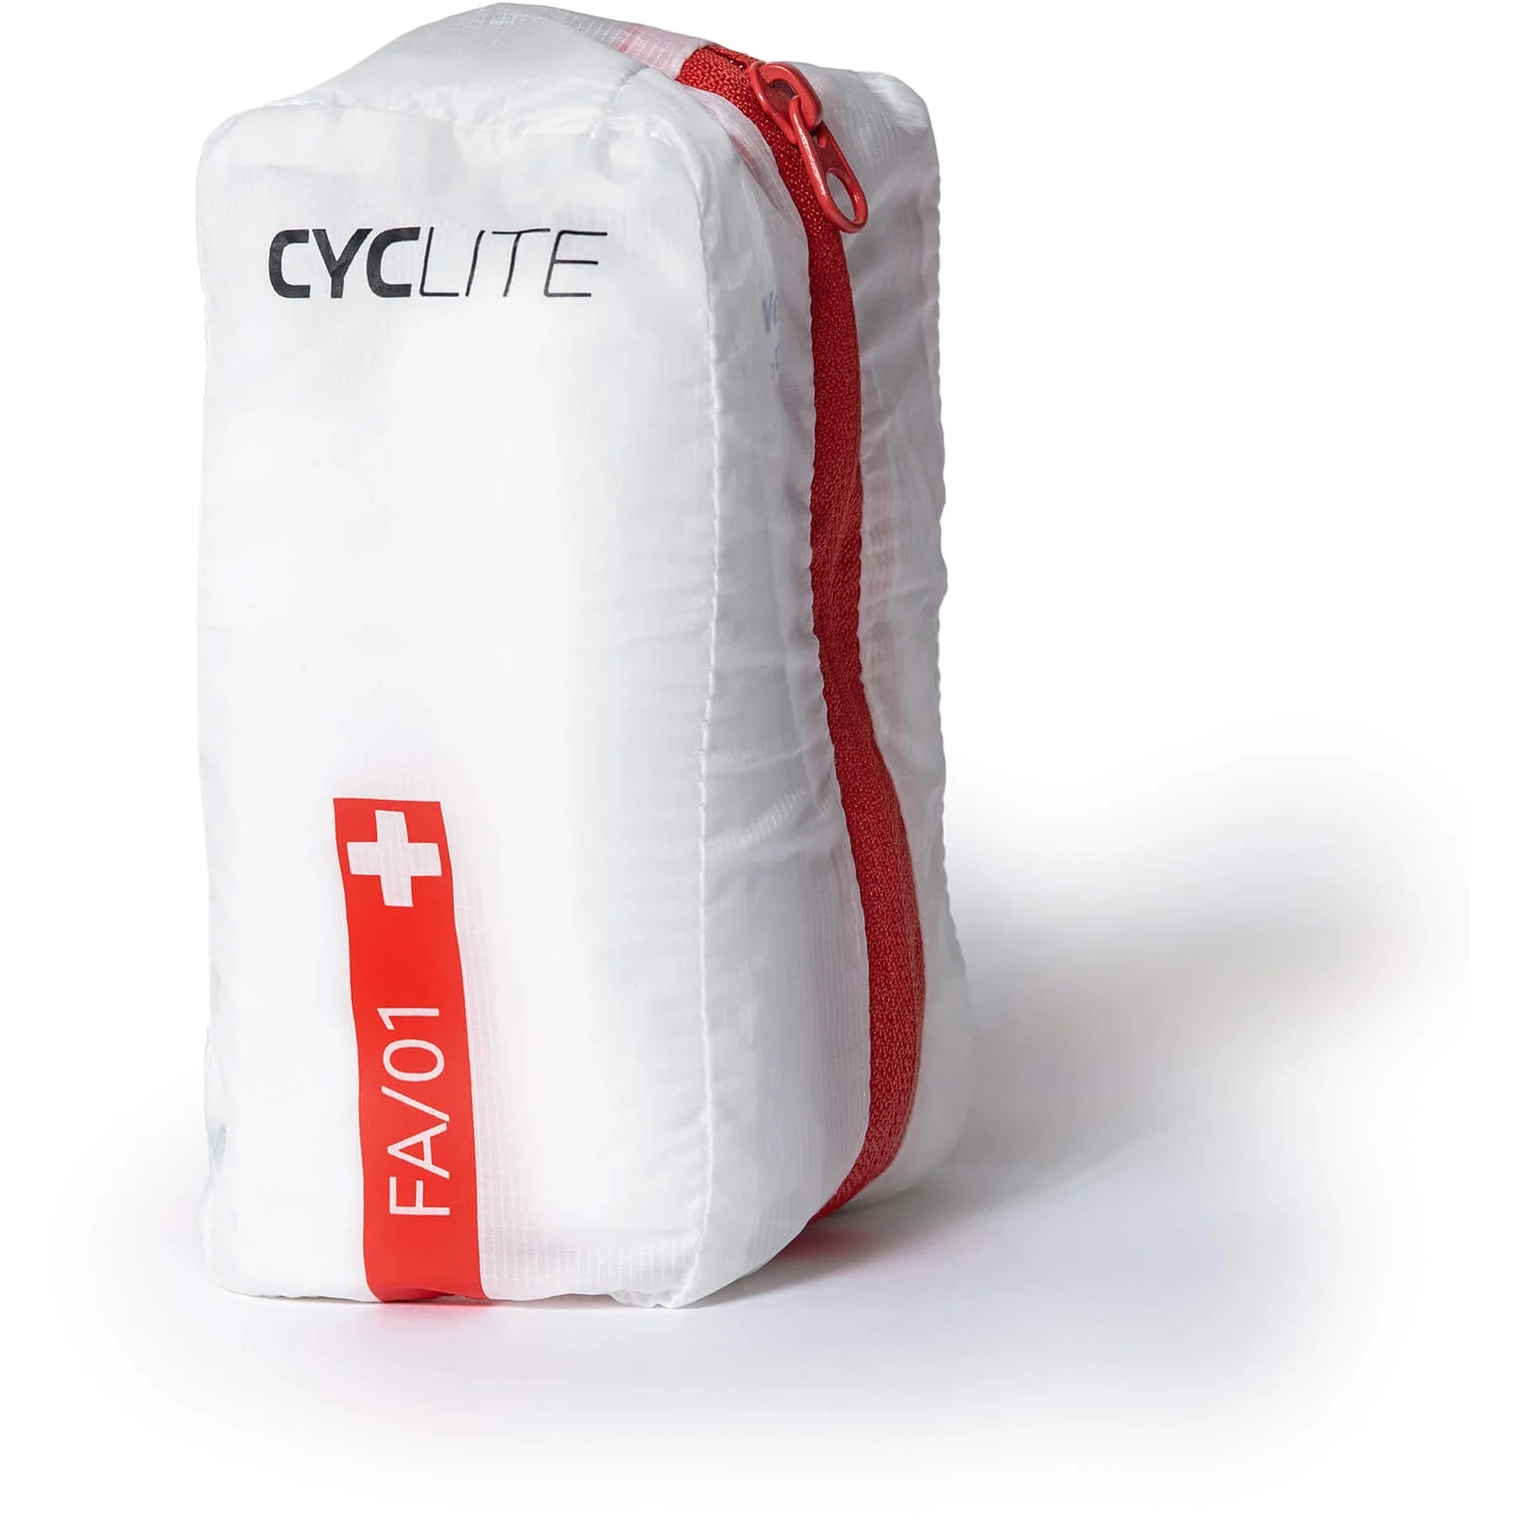 Productfoto van Cyclite First Aid Kit - Wit